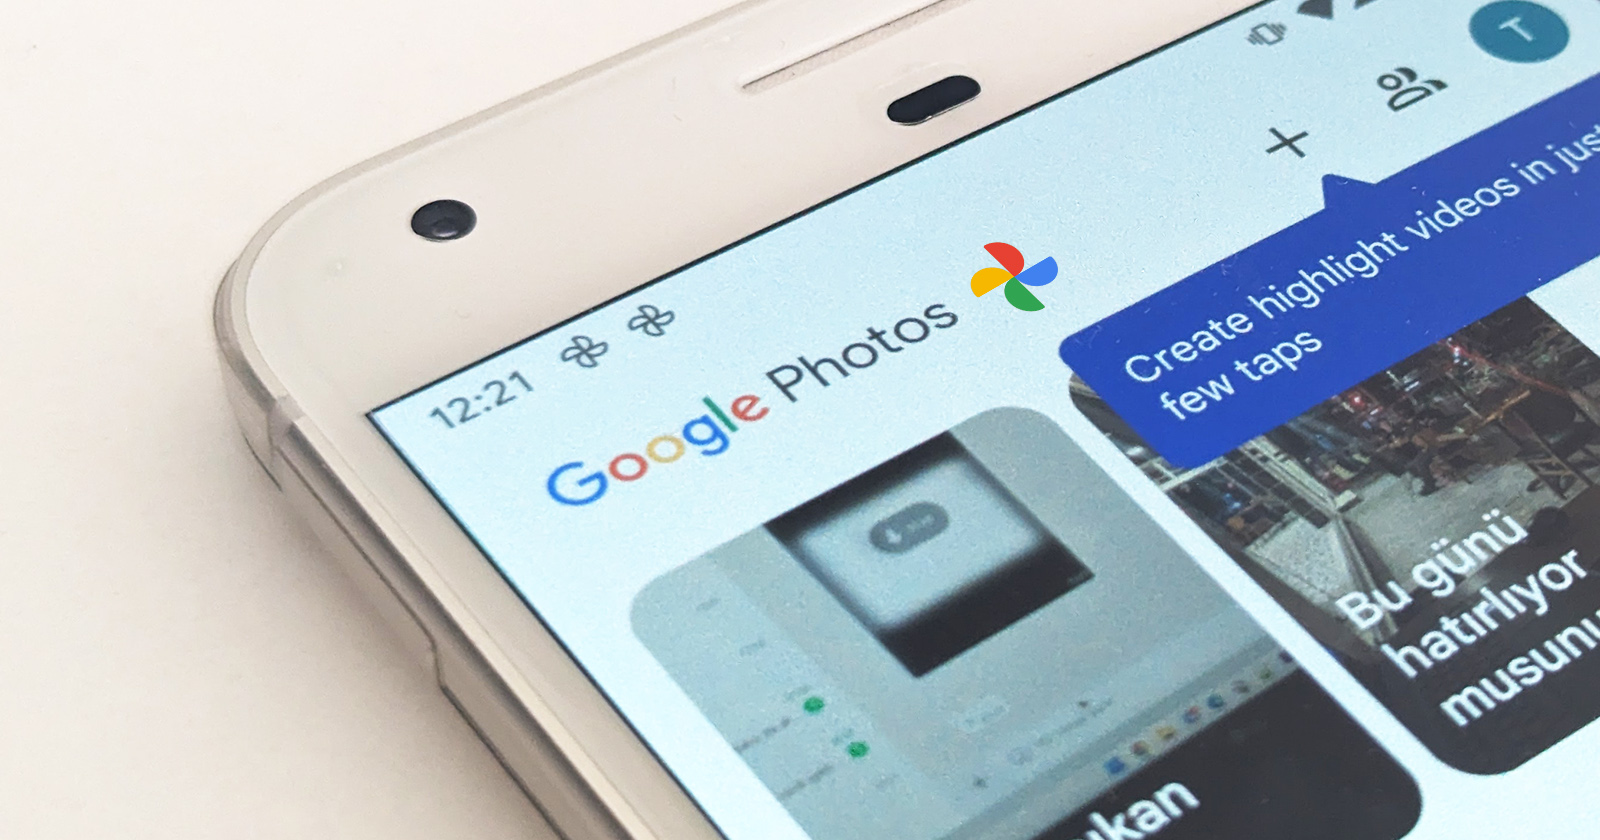 You could have unlimited Google Photos backup on your hands, check it now